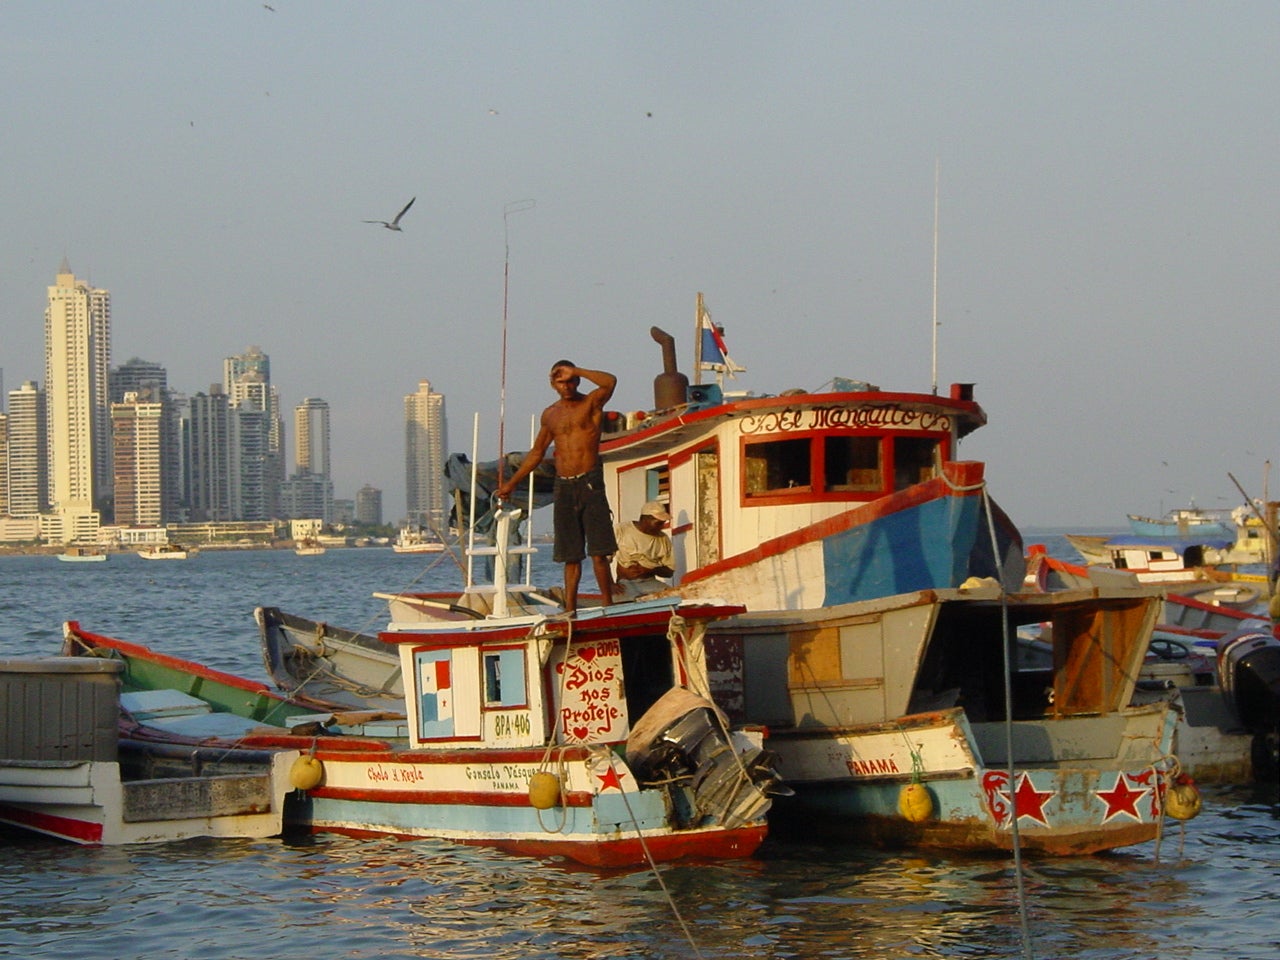 Panama is among the global tax havens that house law firms who create 'shell' companies